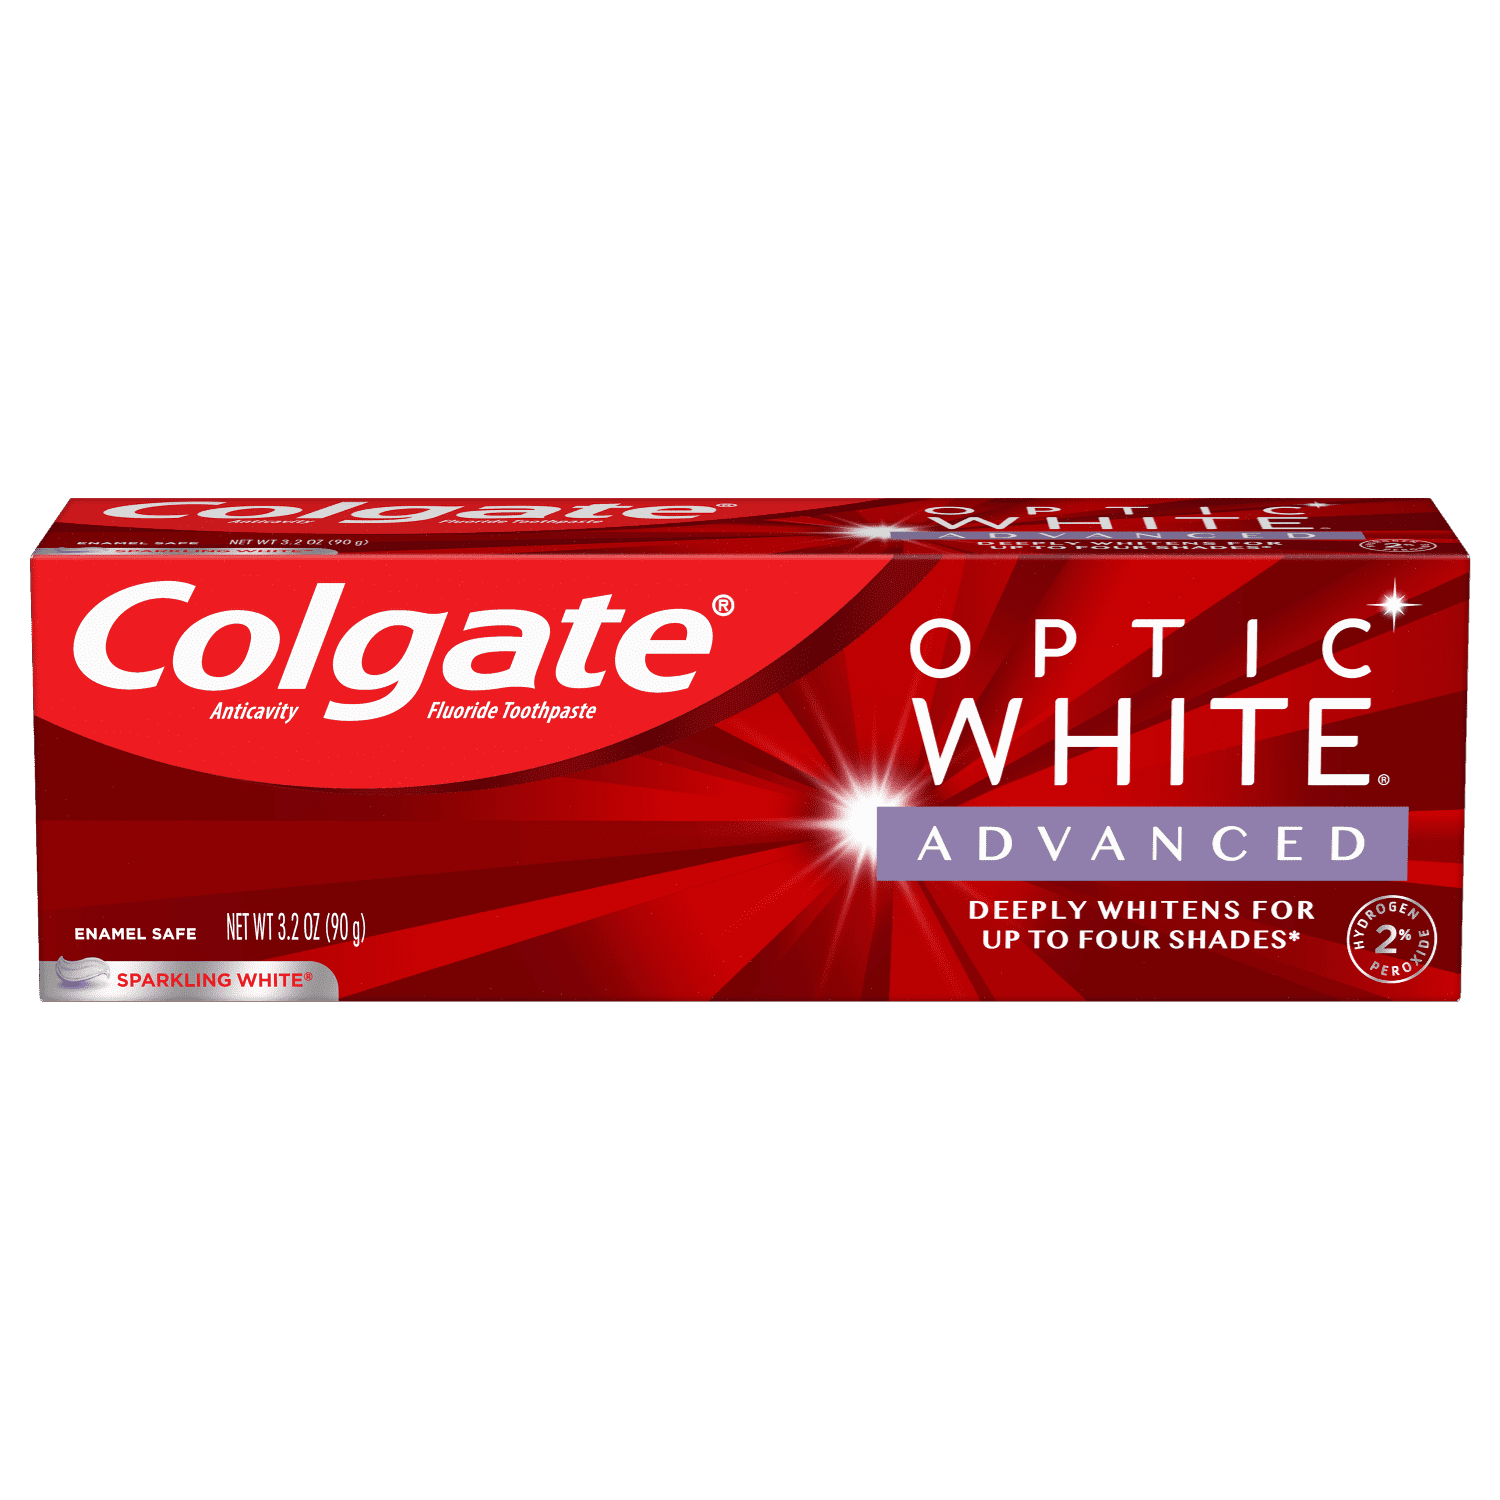 Colgate 360 Toothbrush with Tongue and Cheek Cleaner, Medium Toothbrush + 2 Units Colgate Optic White Advanced Teeth Whitening Toothpaste, 3.2 Oz.